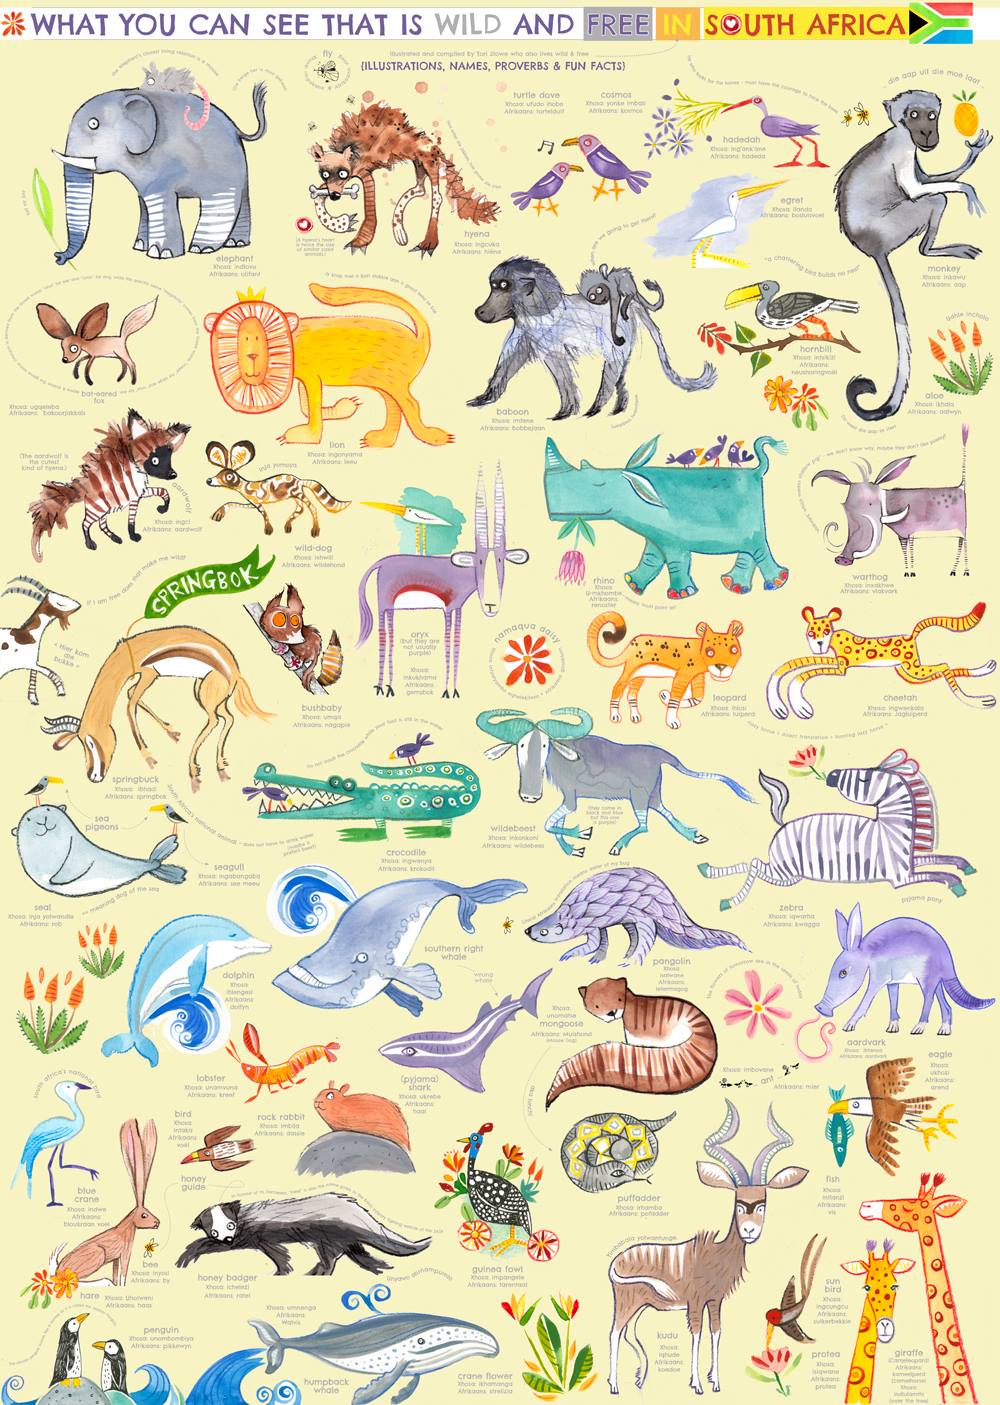 South African Wildlife Poster by Tori Stowe